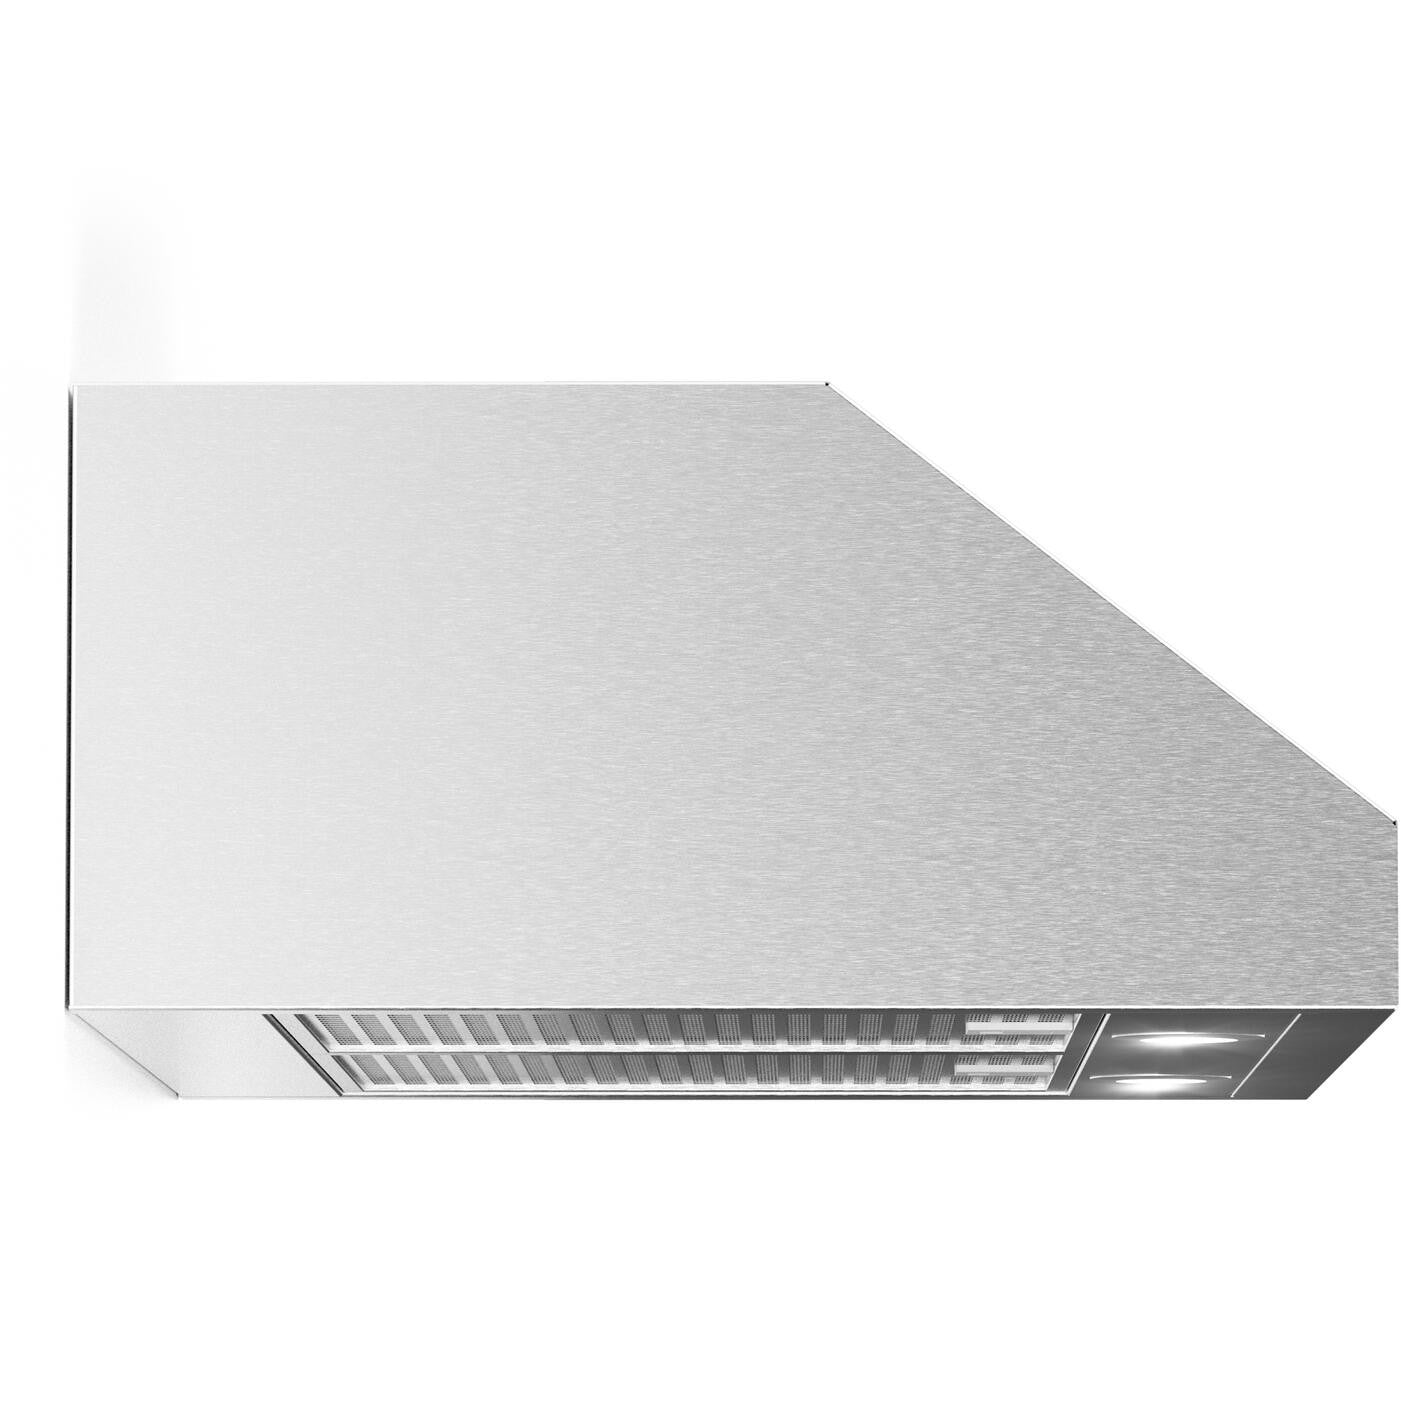 Forte Lucca 30" 600 CFM Convertible Residential Round Duct Stainless Steel Under Cabinet Range Hood With Recirculating Kit, Charcoal Filters, LED Lighting